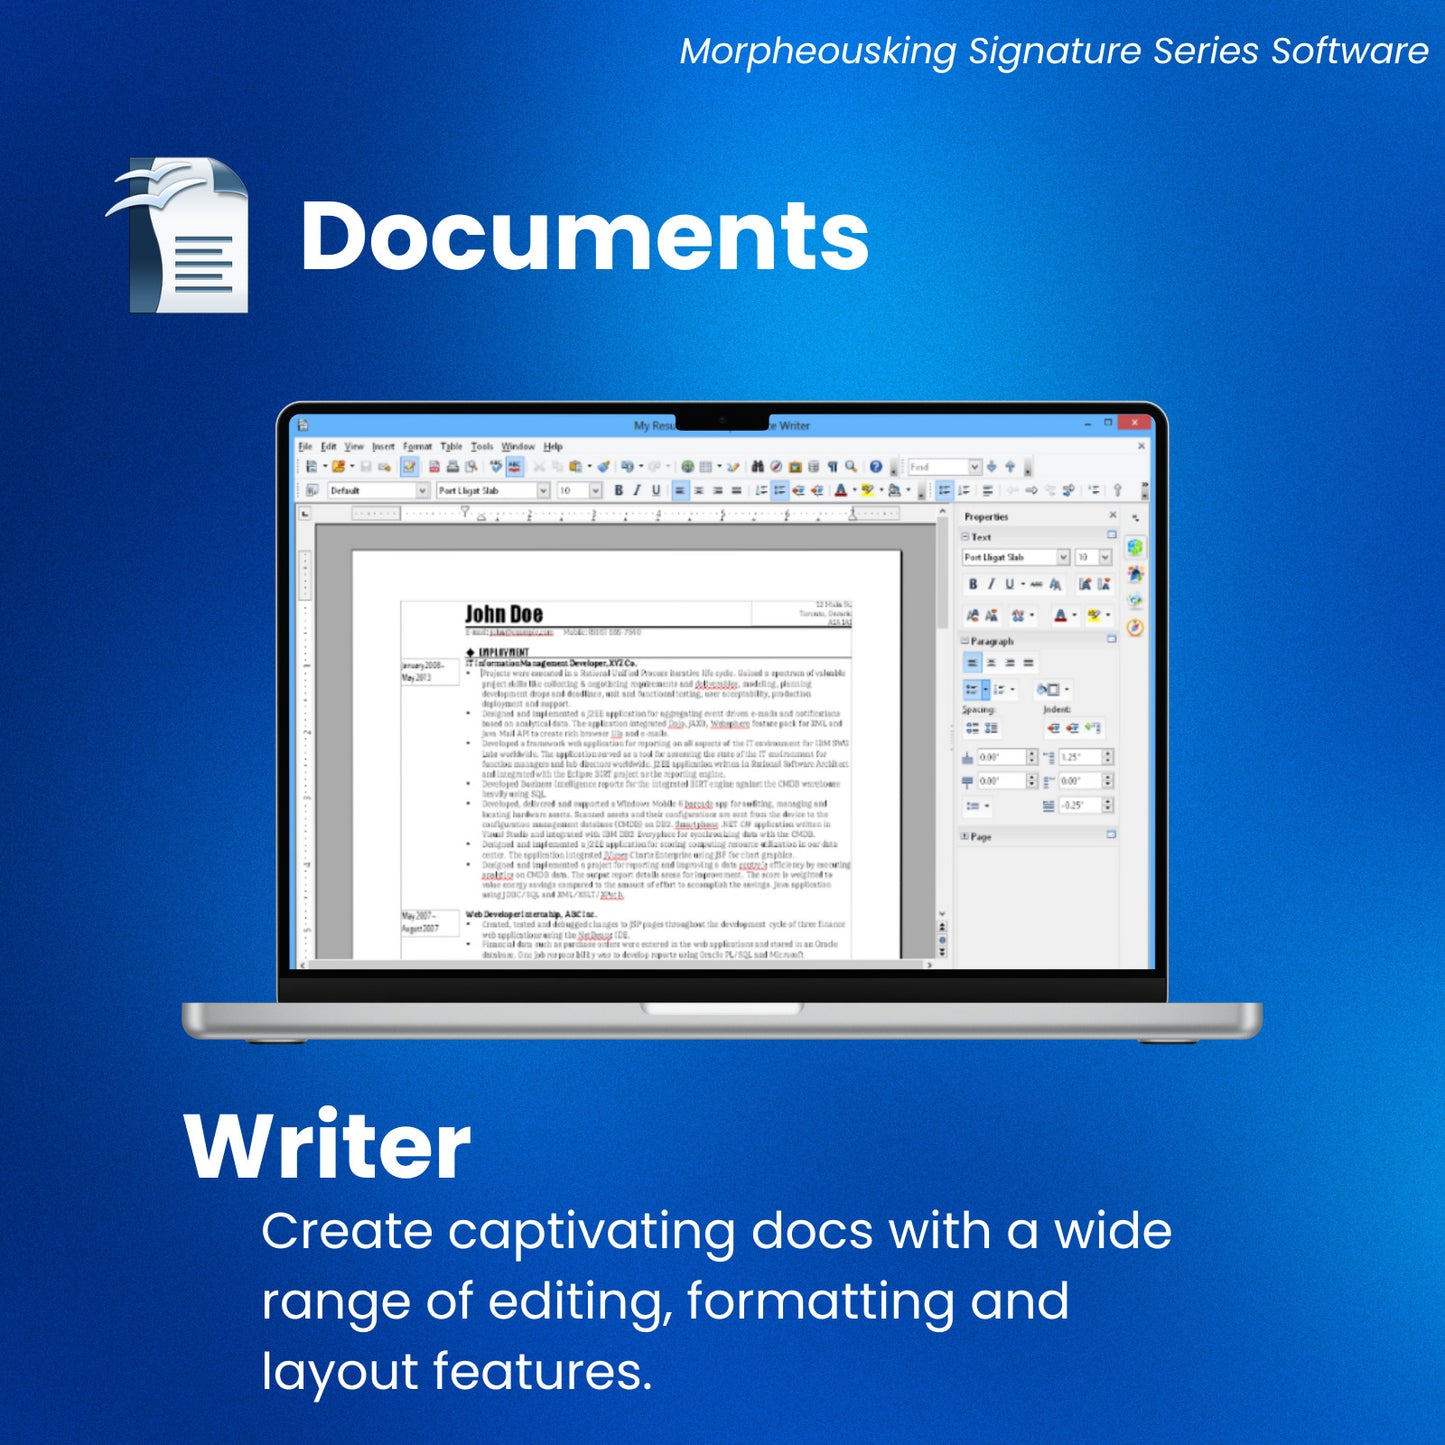 Apache Open Office Writer - Documents and Word Processor